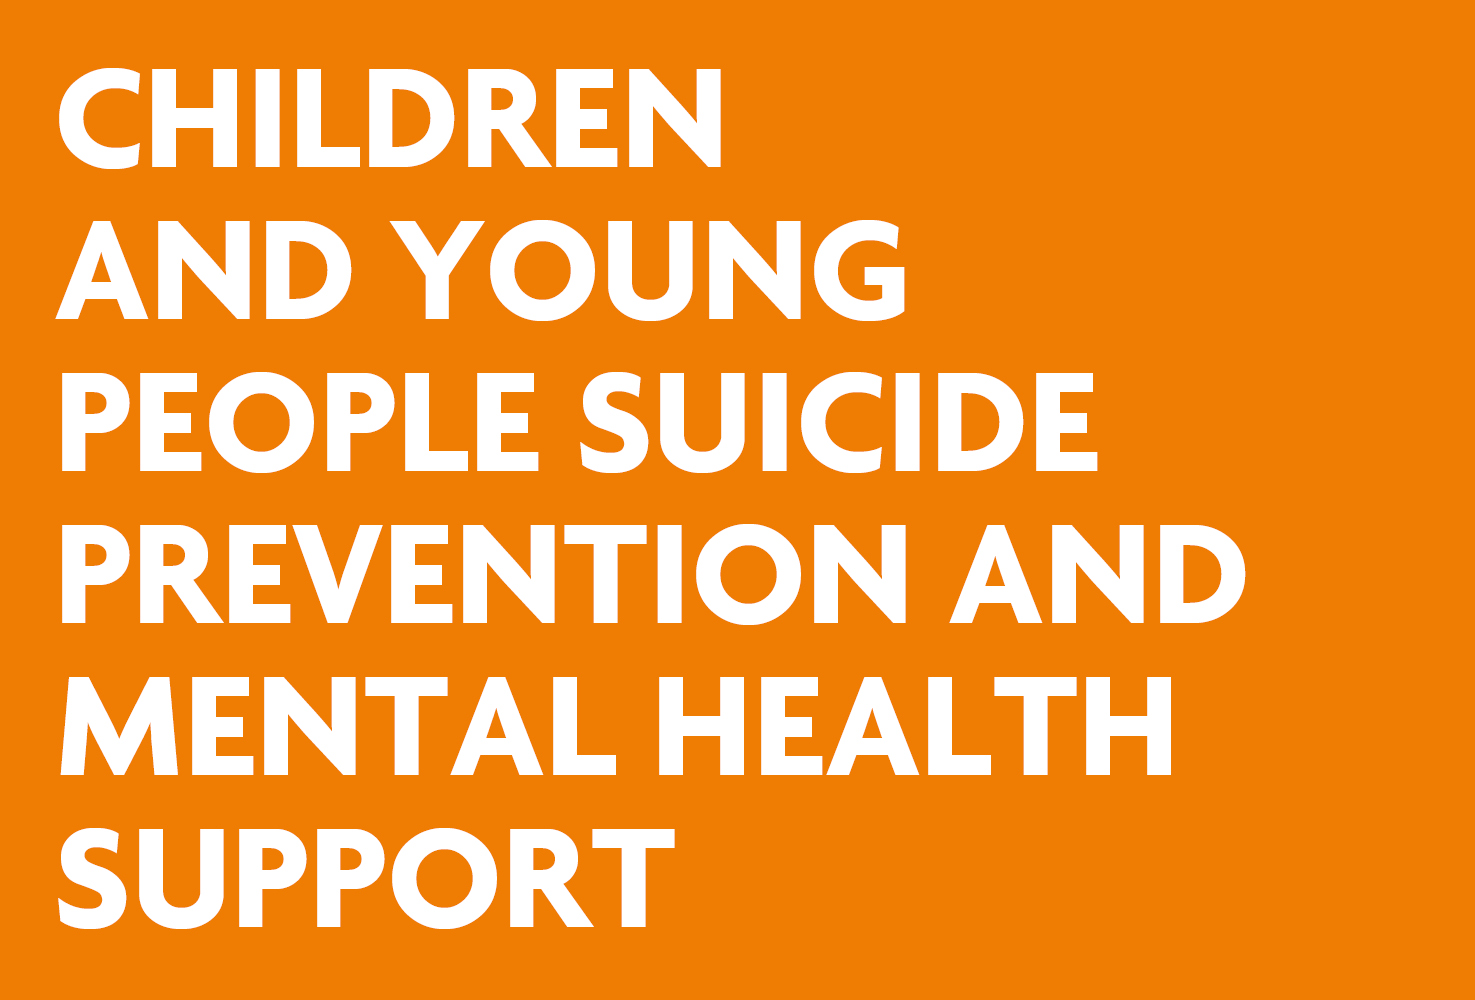 Children and Young People Suicide Prevention and Mental Health Support